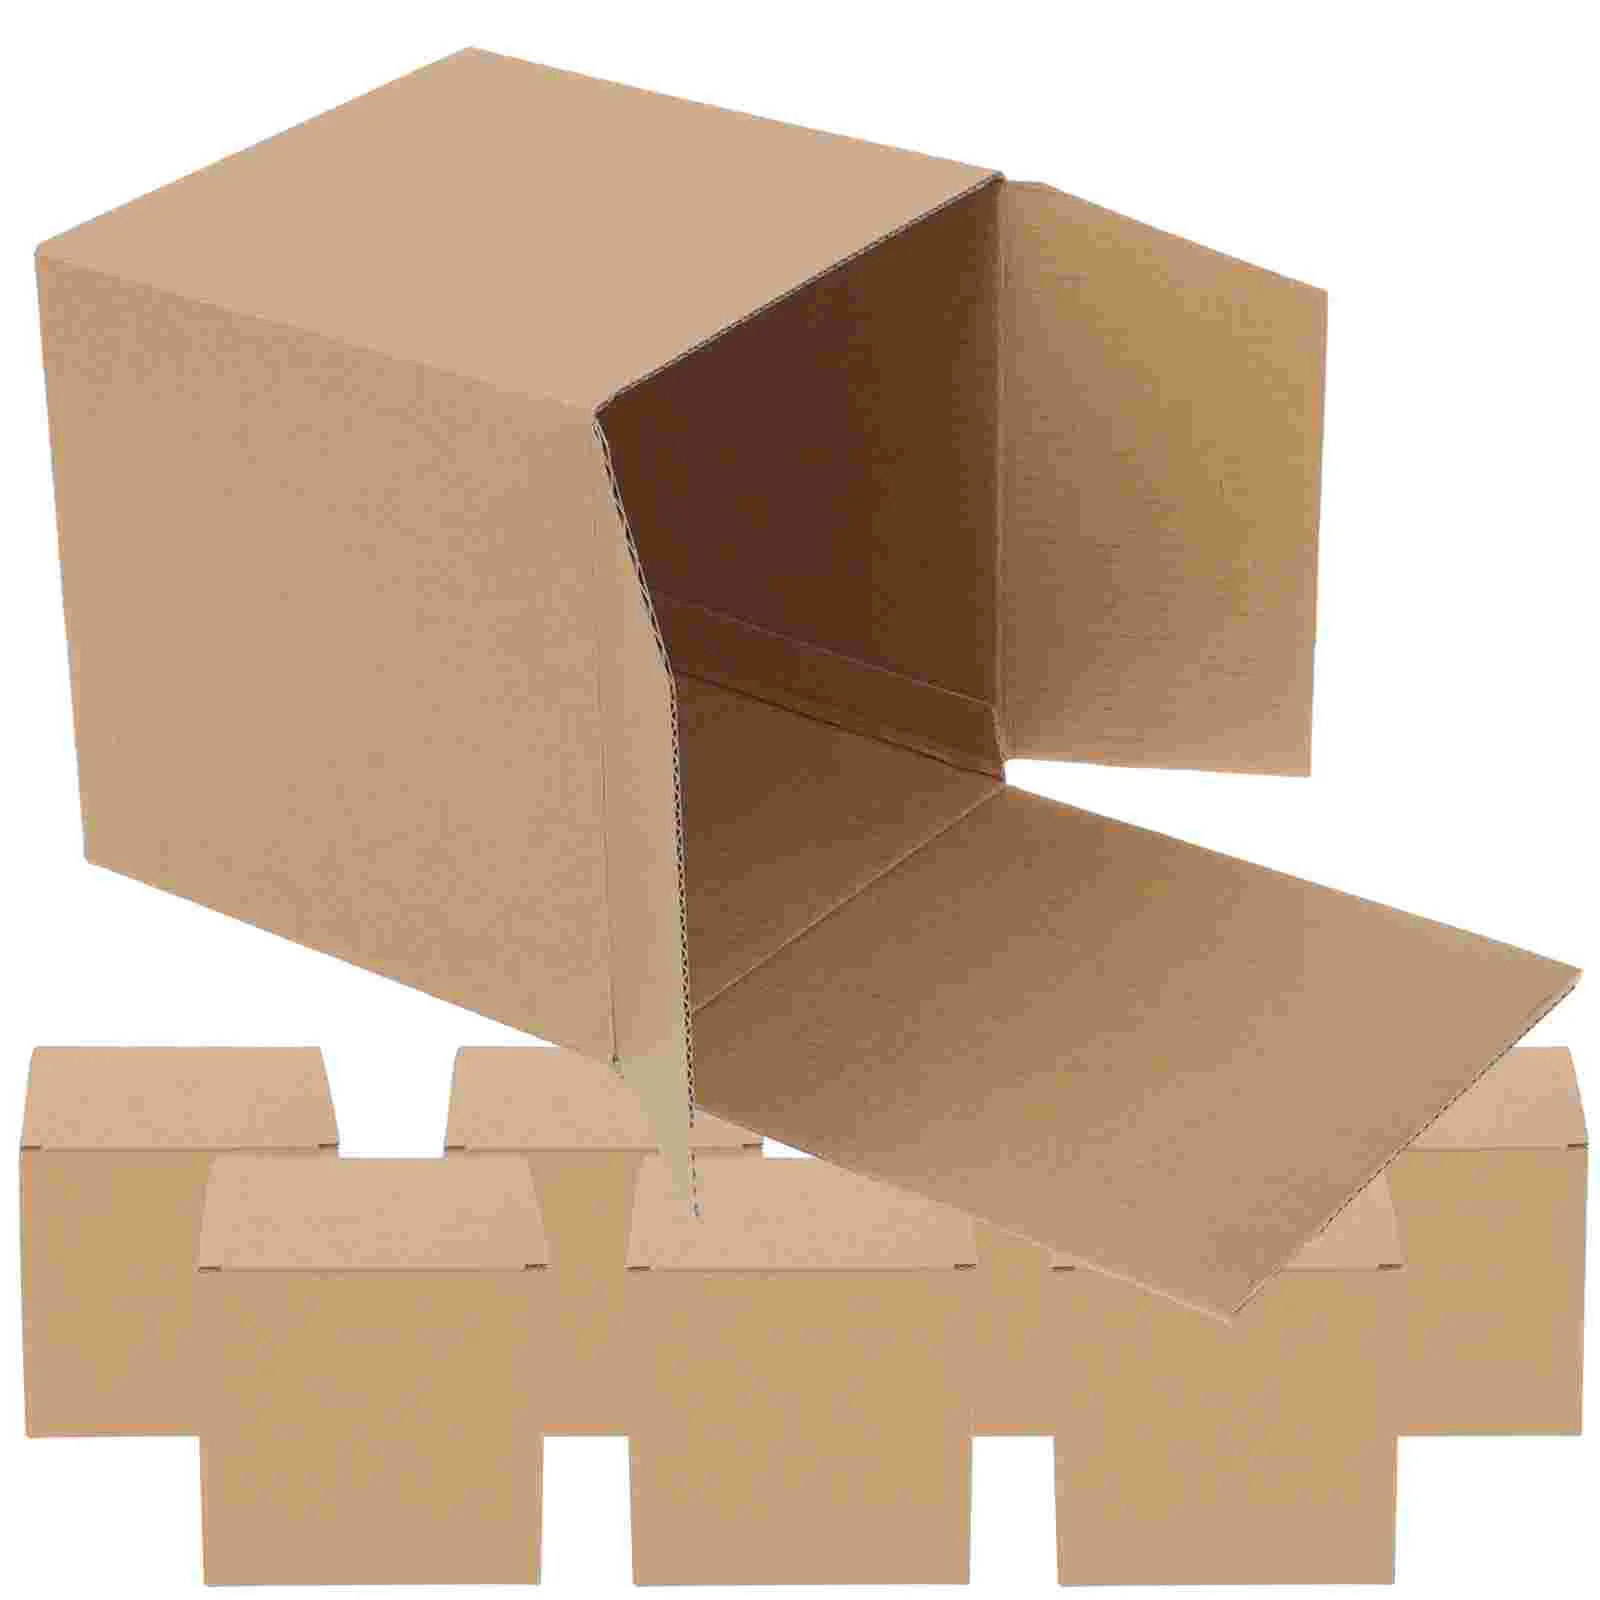 

Boxes Box Shipping Cardboard Corrugated Packaging Business Packing Mini Large 6X6X6 Carton Gift Mailer Paper Mailing Kraft Case